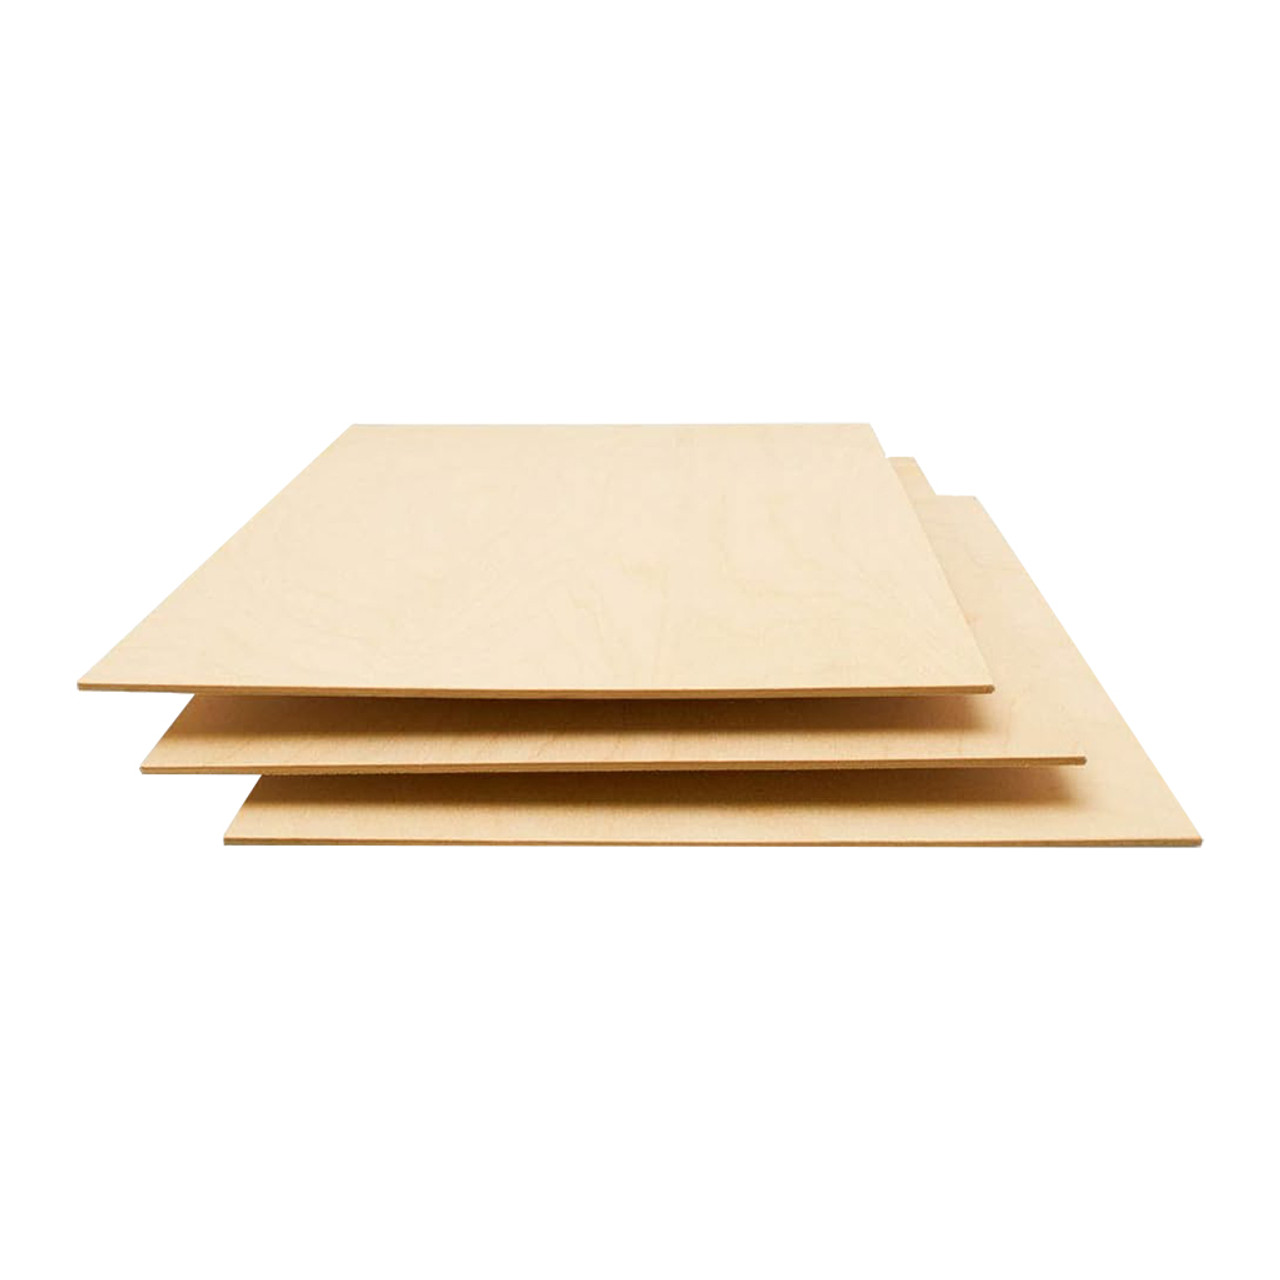 Midwest Plywood 1/8 x 12 x 24 (6) [MID5244] - HobbyTown